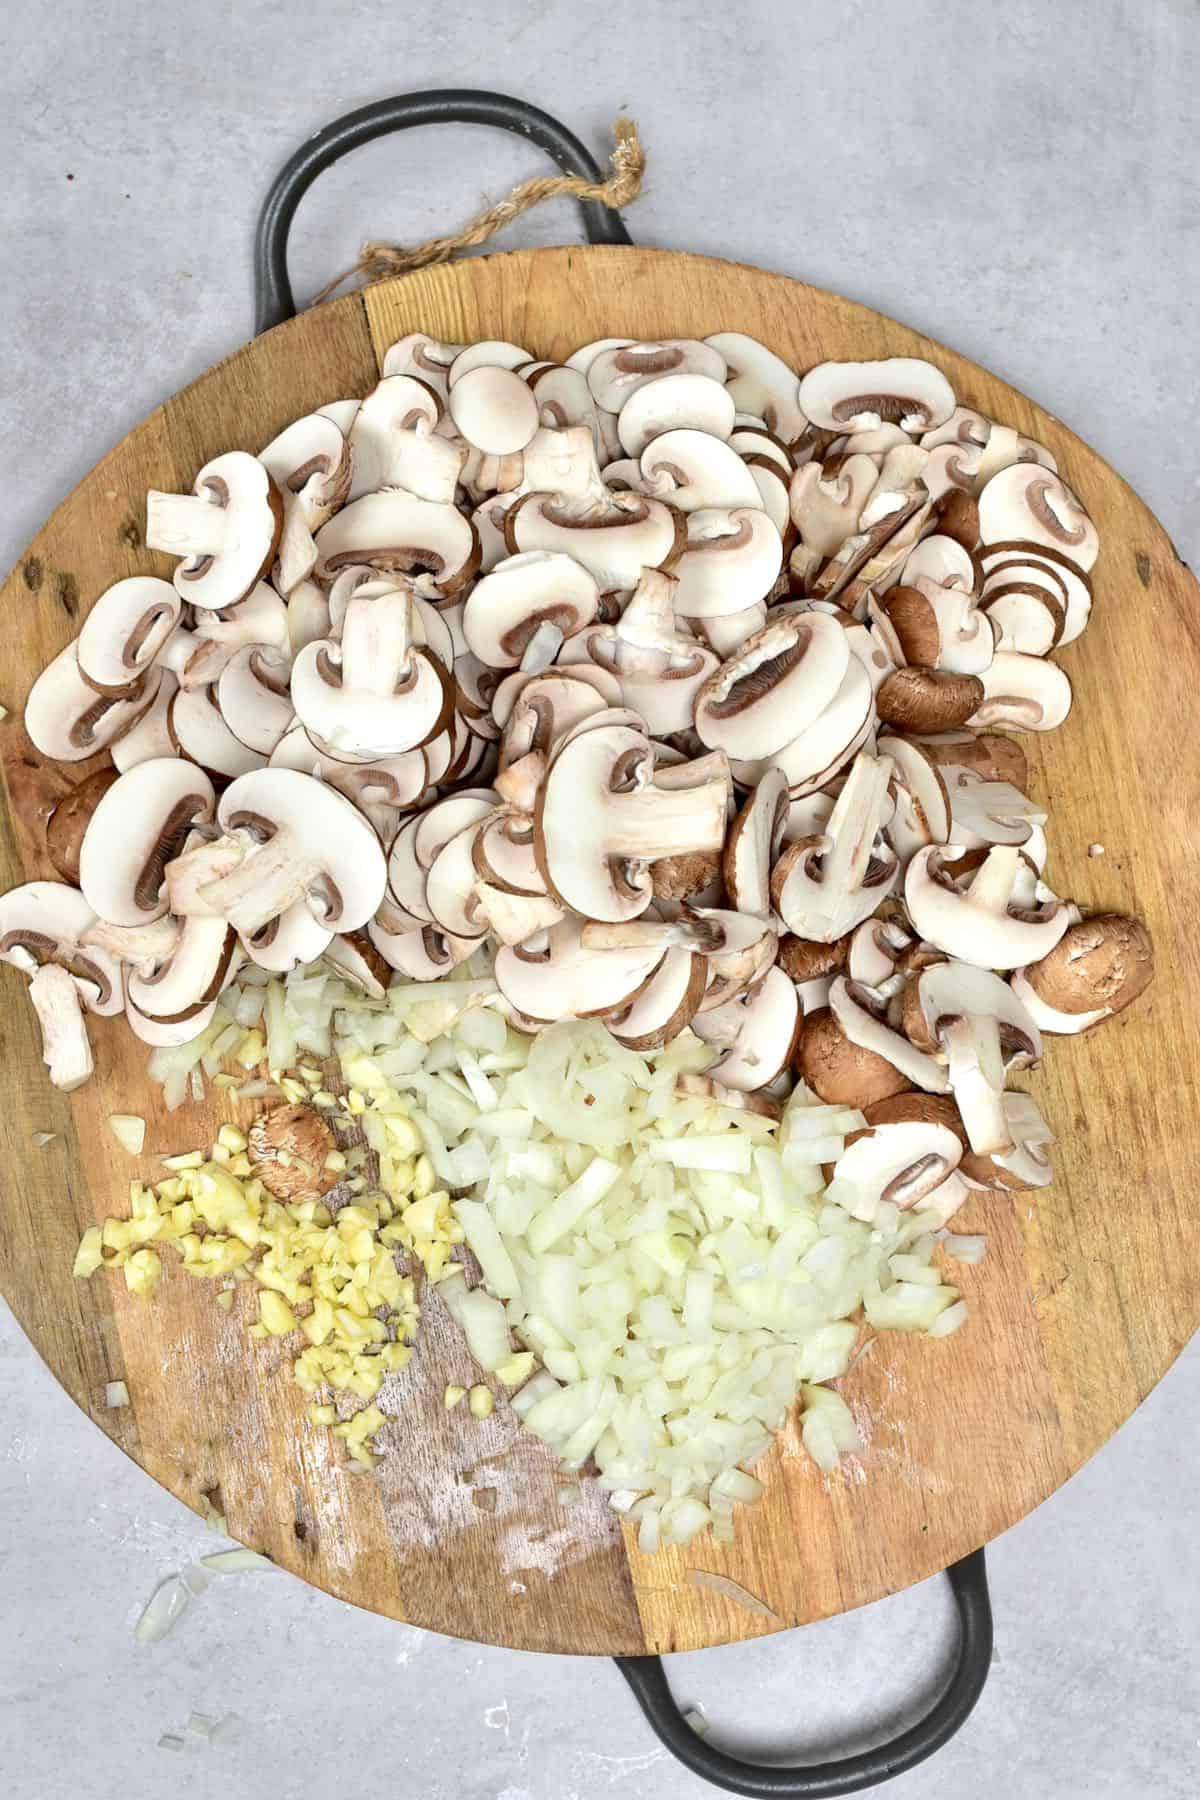 Chopped onion, garlic and mushrooms on a wooden board